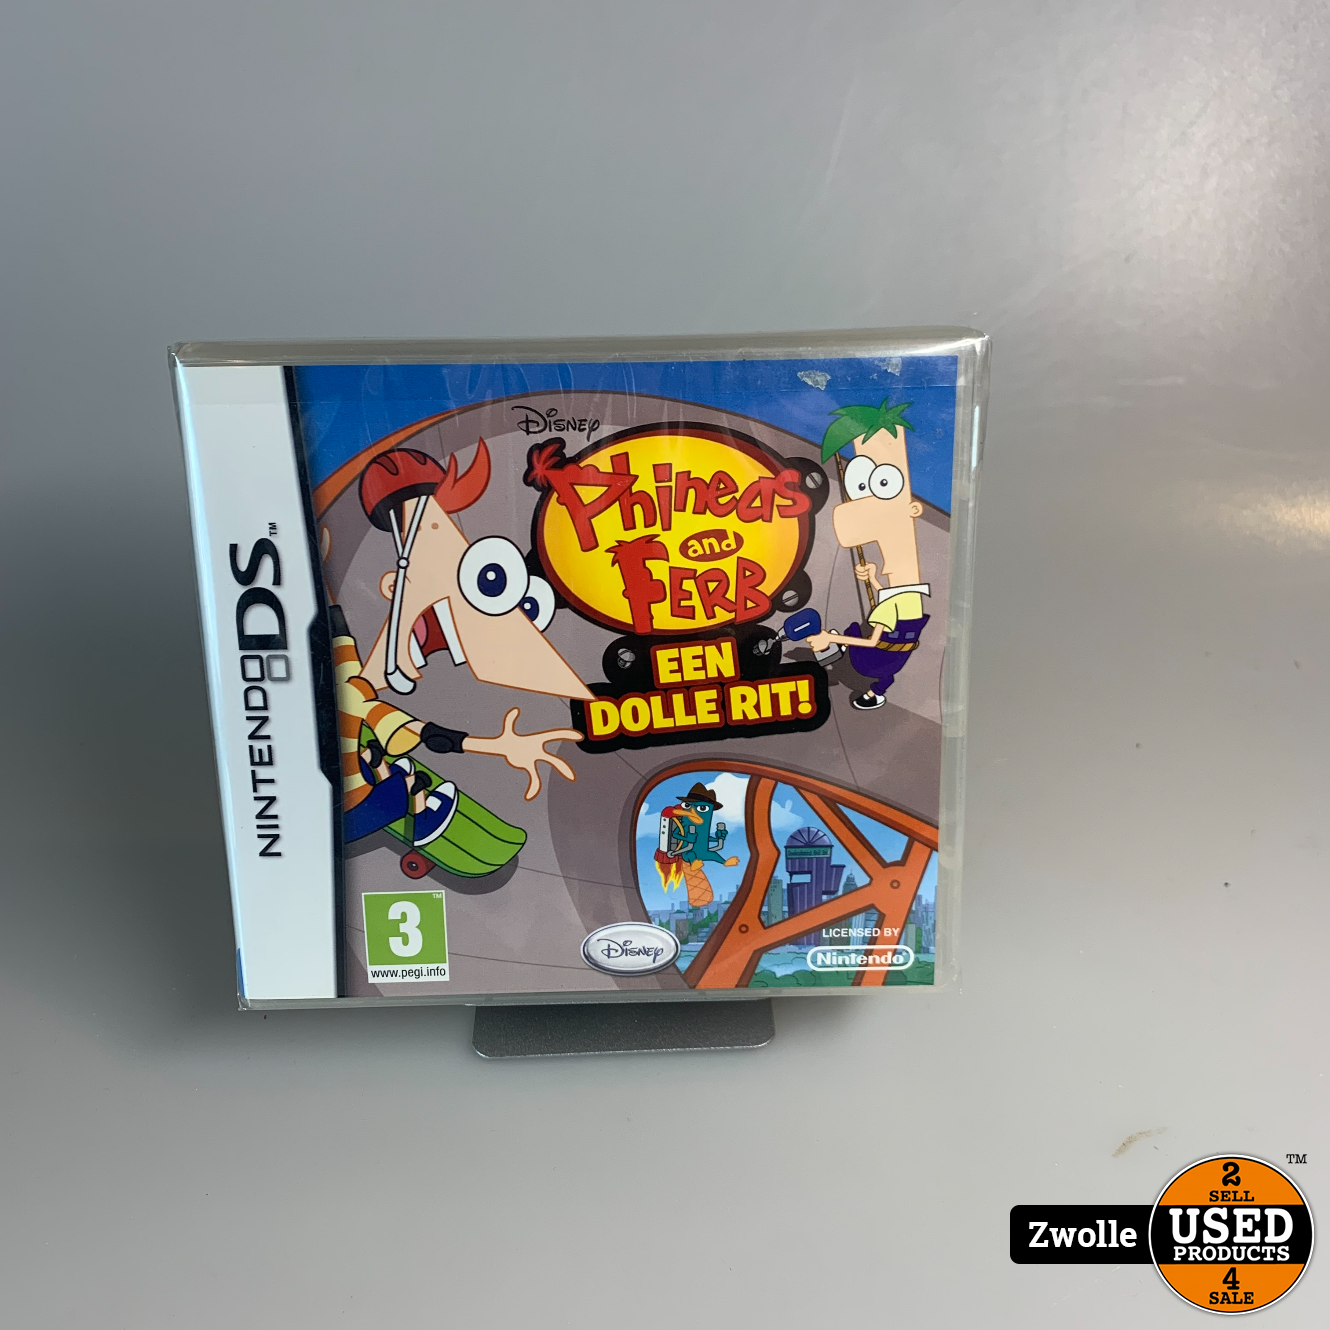 Regan Afm Springen nintendo Nintendo DS Game | Phineas and Ferb - een dolle rit - Used  Products Zwolle